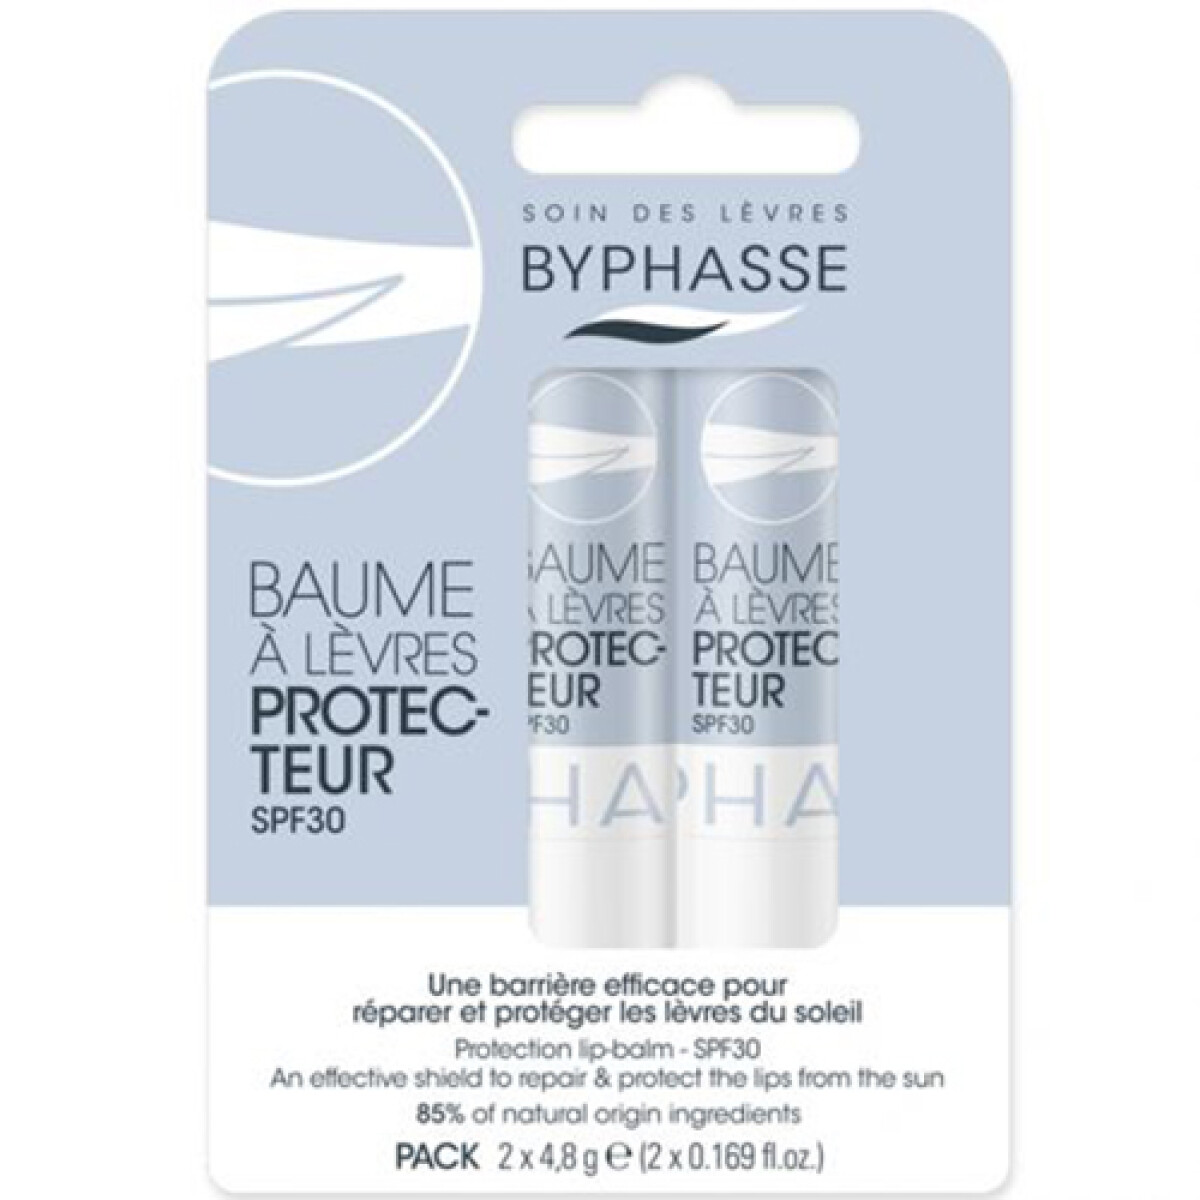 Pack x2 Bálsamo protector SPF 30 Byphasse 